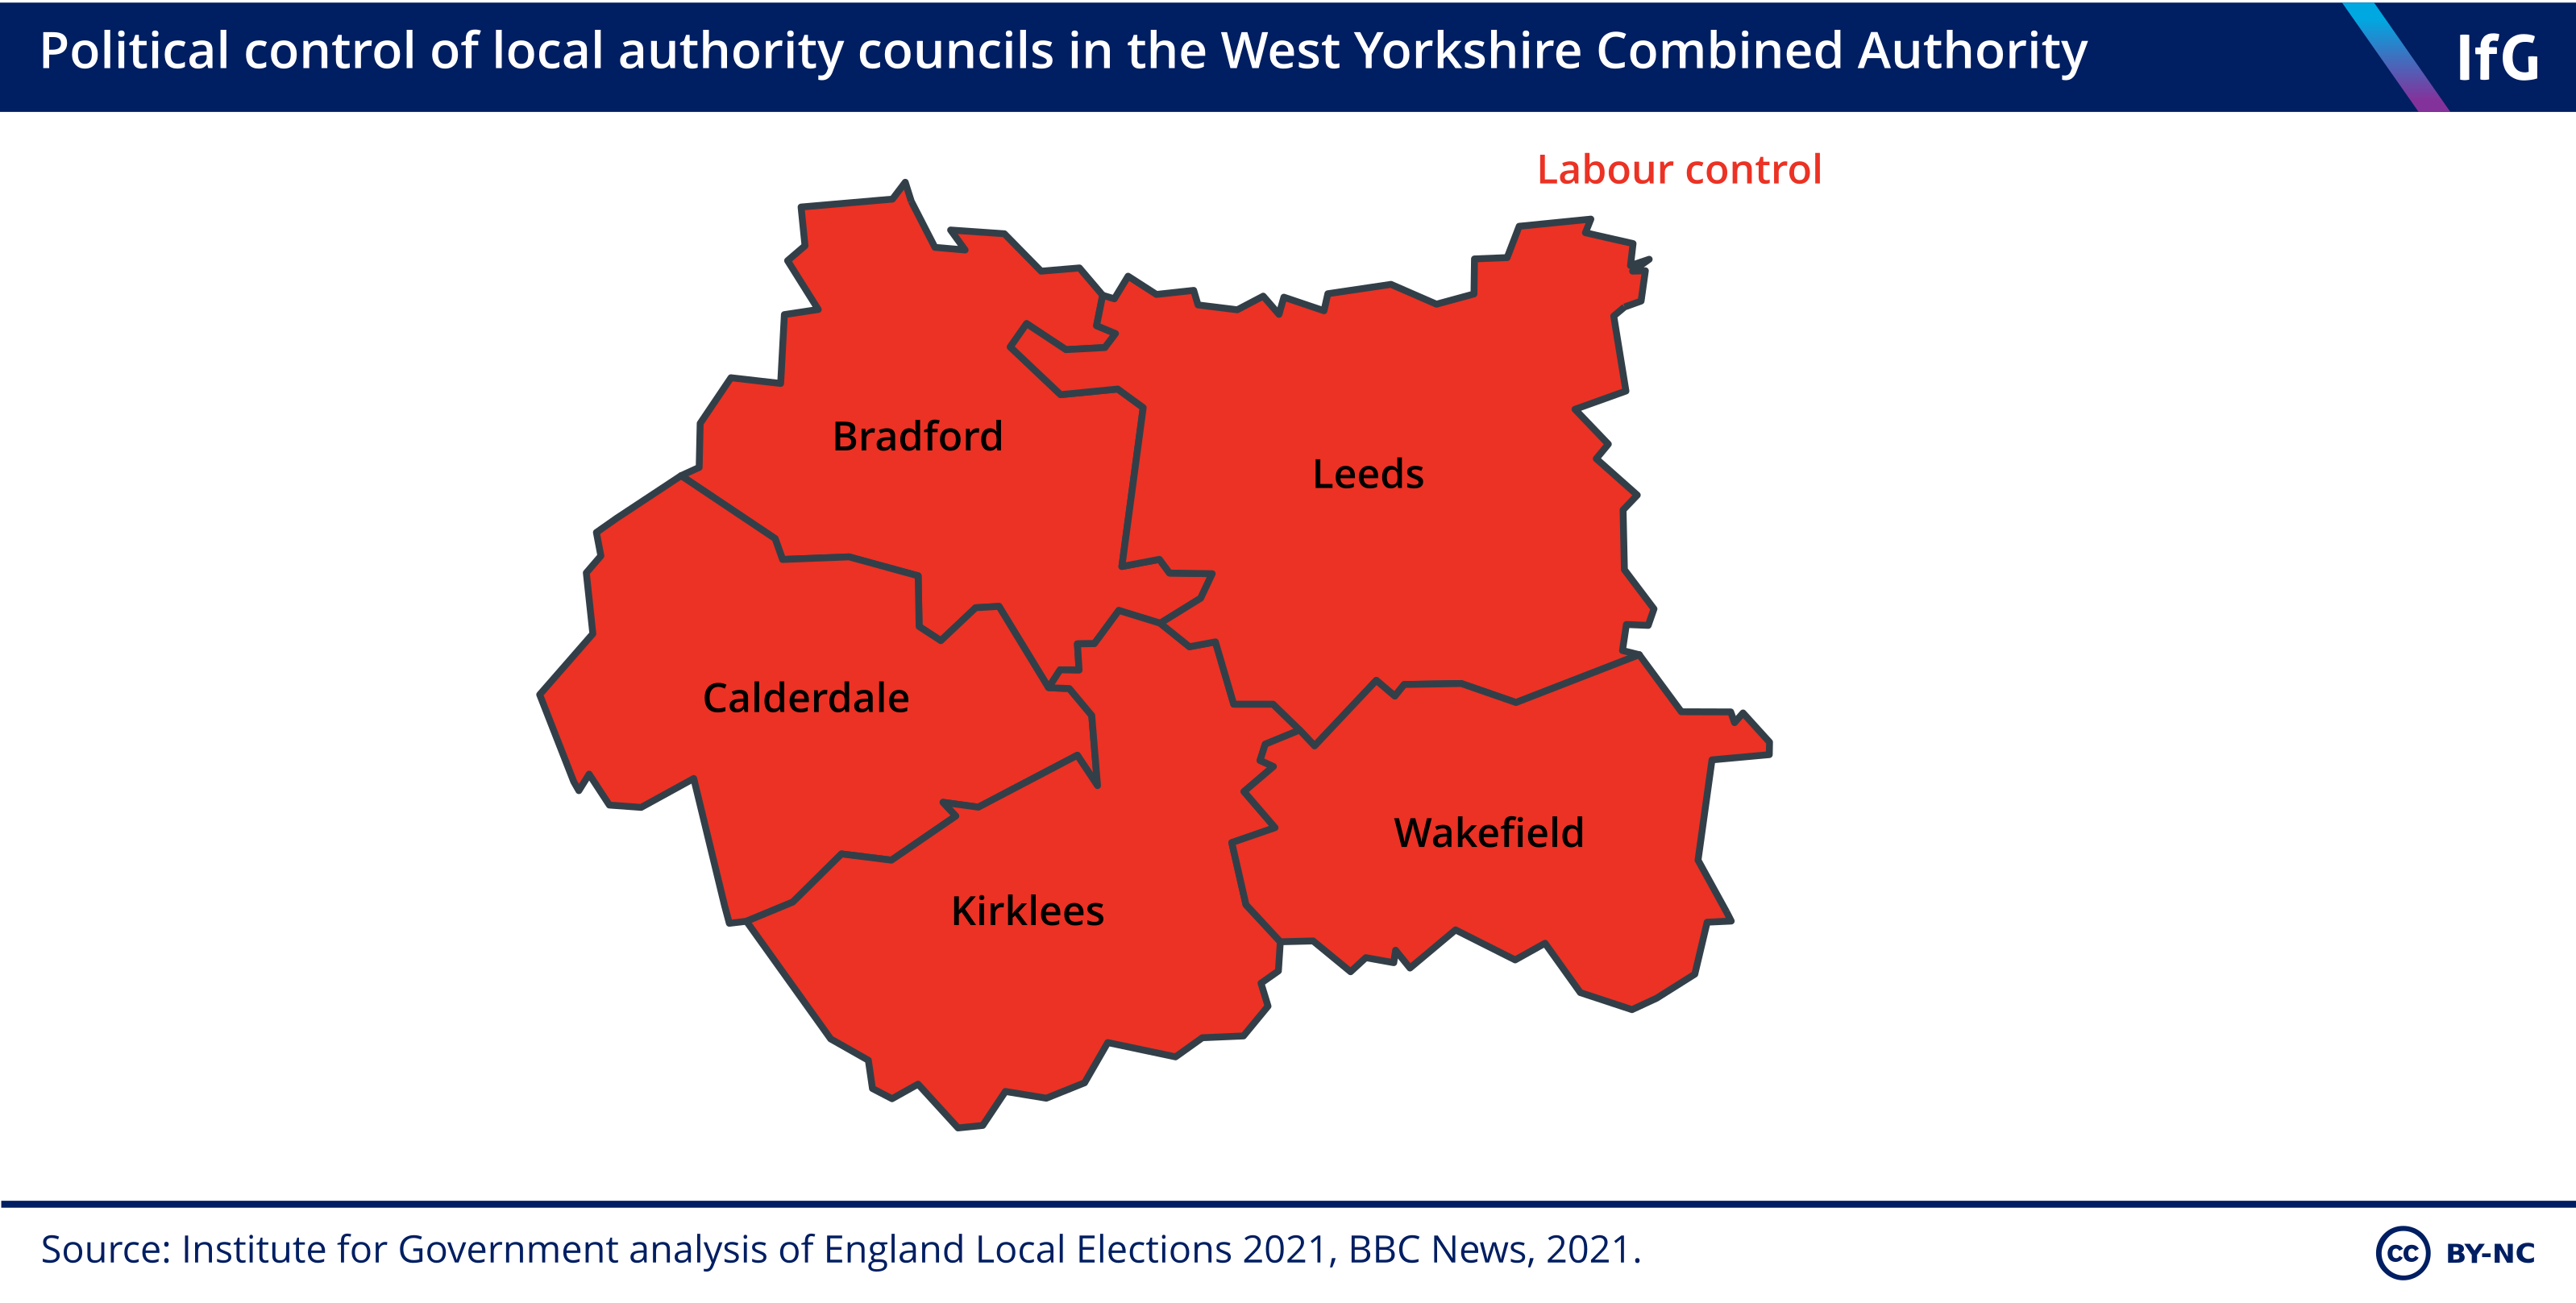 Political control of councils in the West Yorkshire Combined Authority